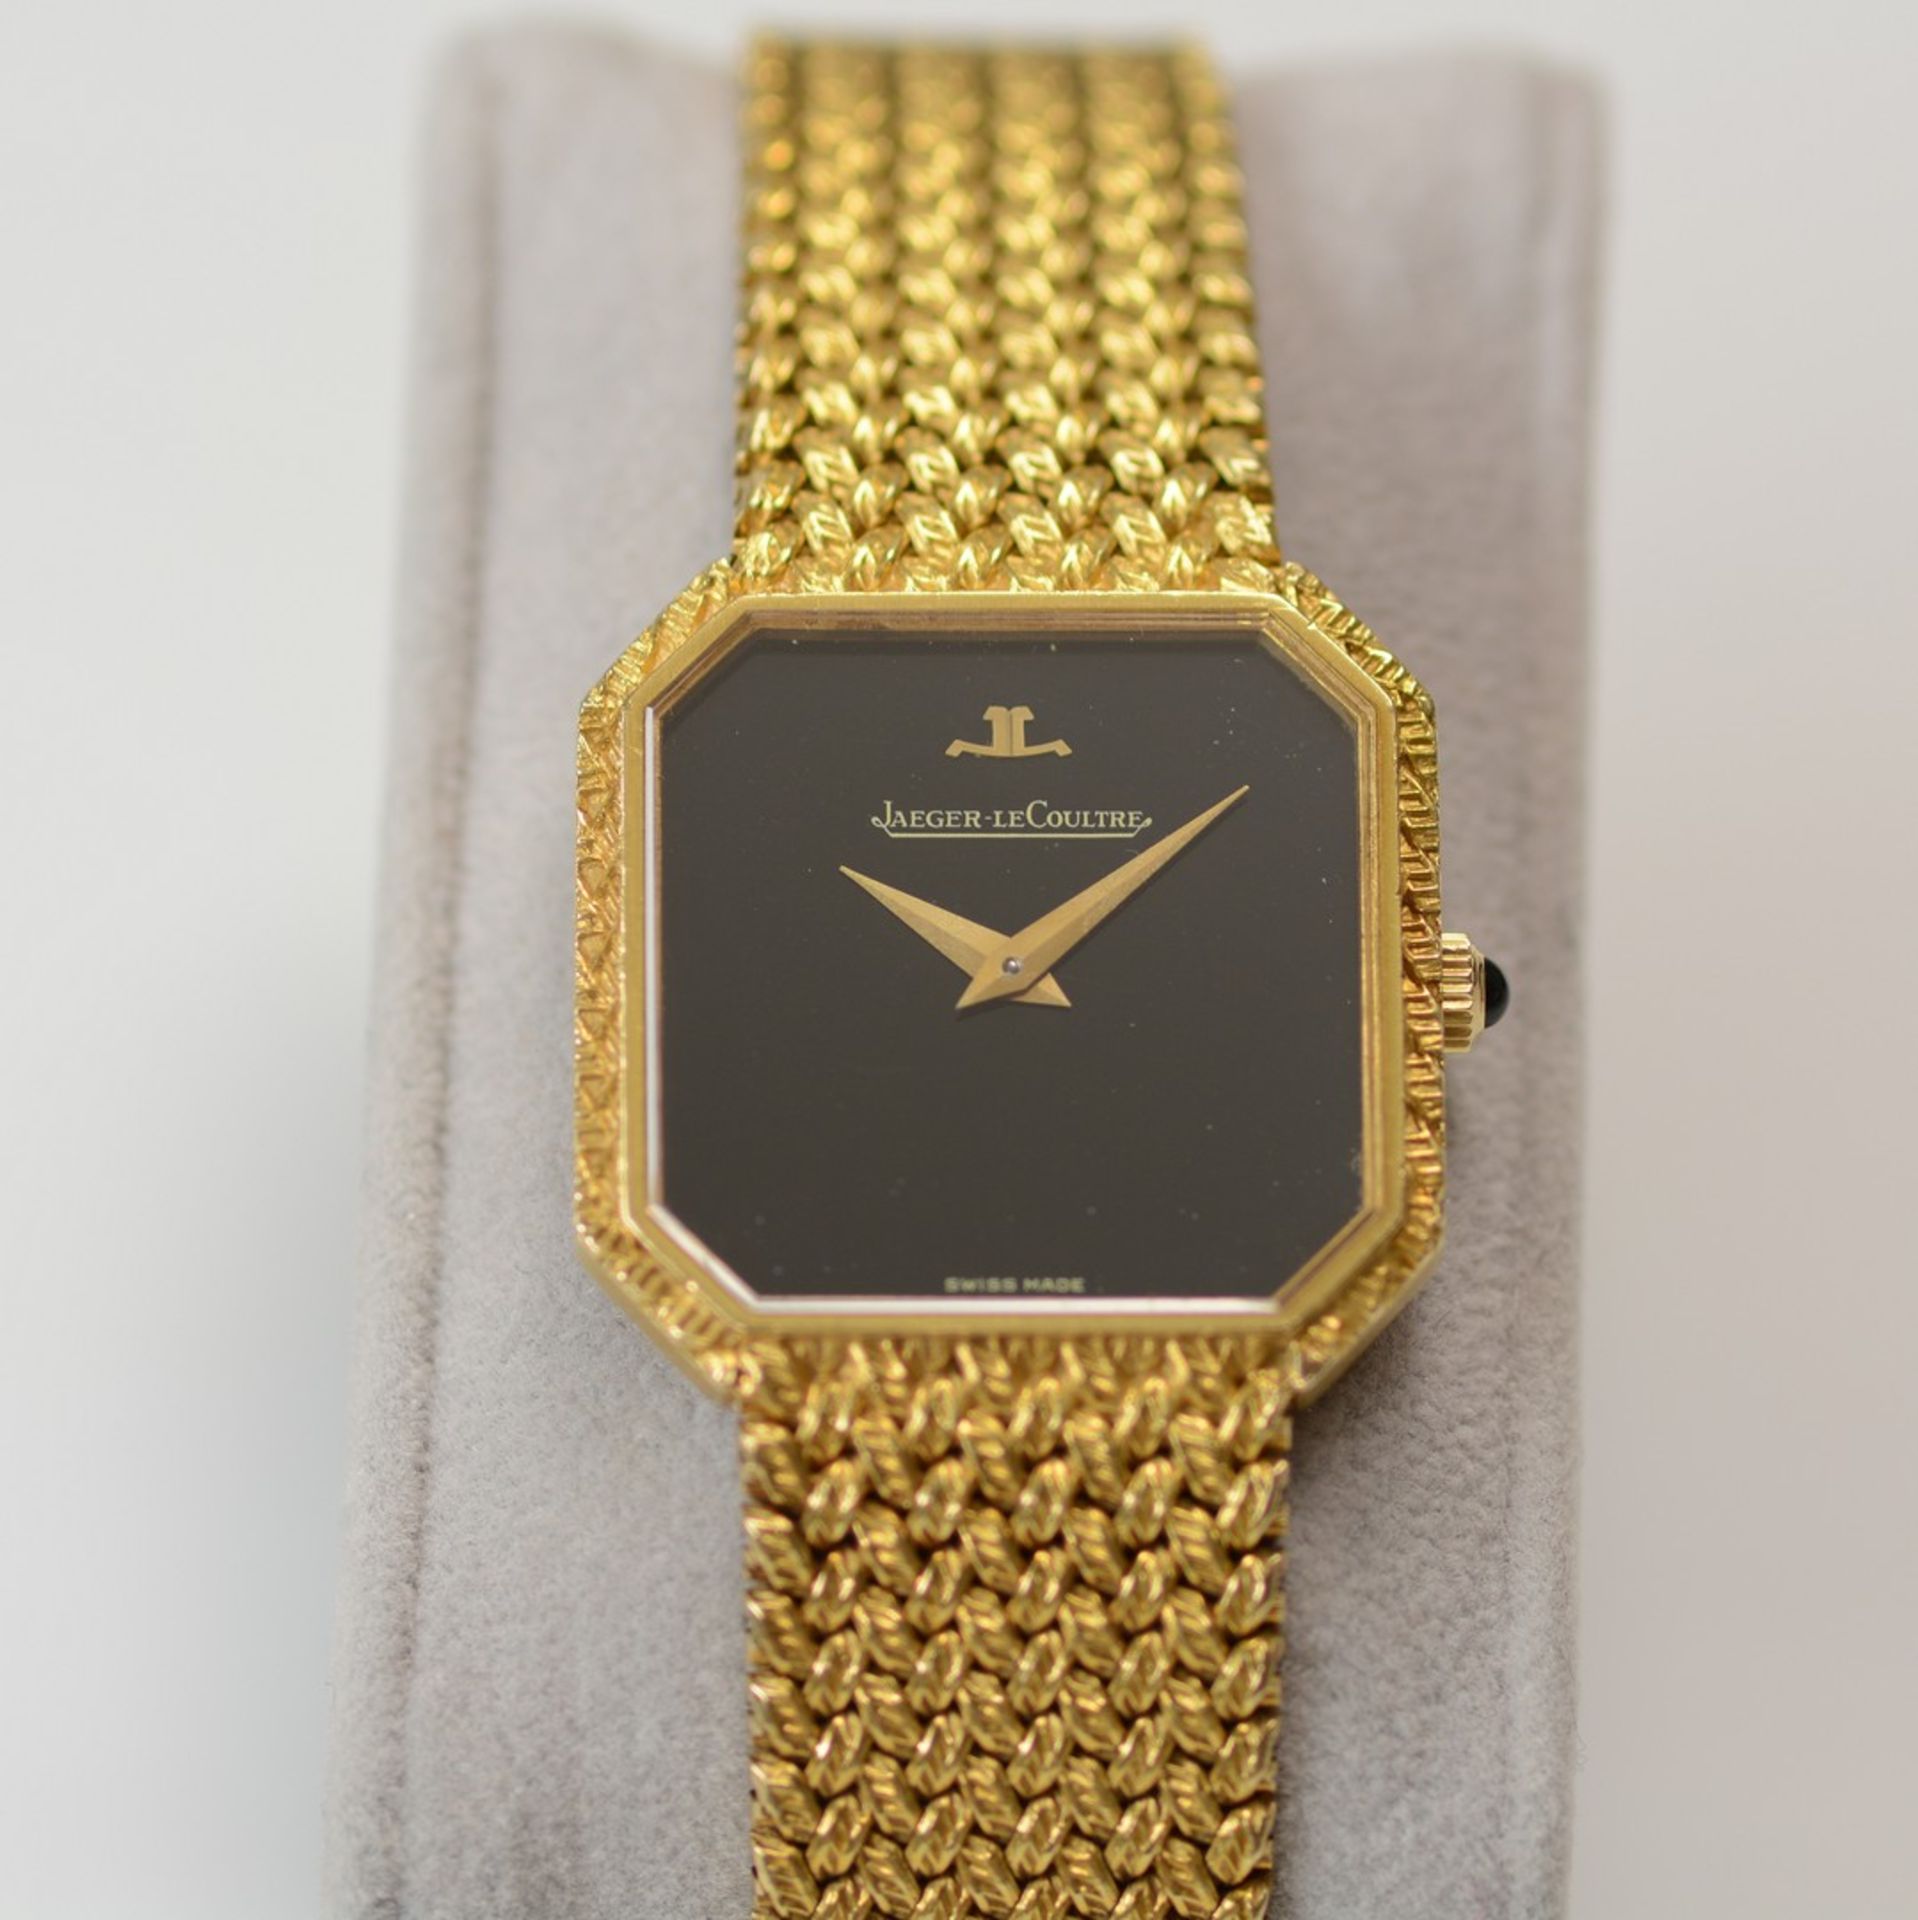 Jaeger-LeCoultre / Vintage - Unisex Yellow gold Wrist Watch - Image 4 of 14